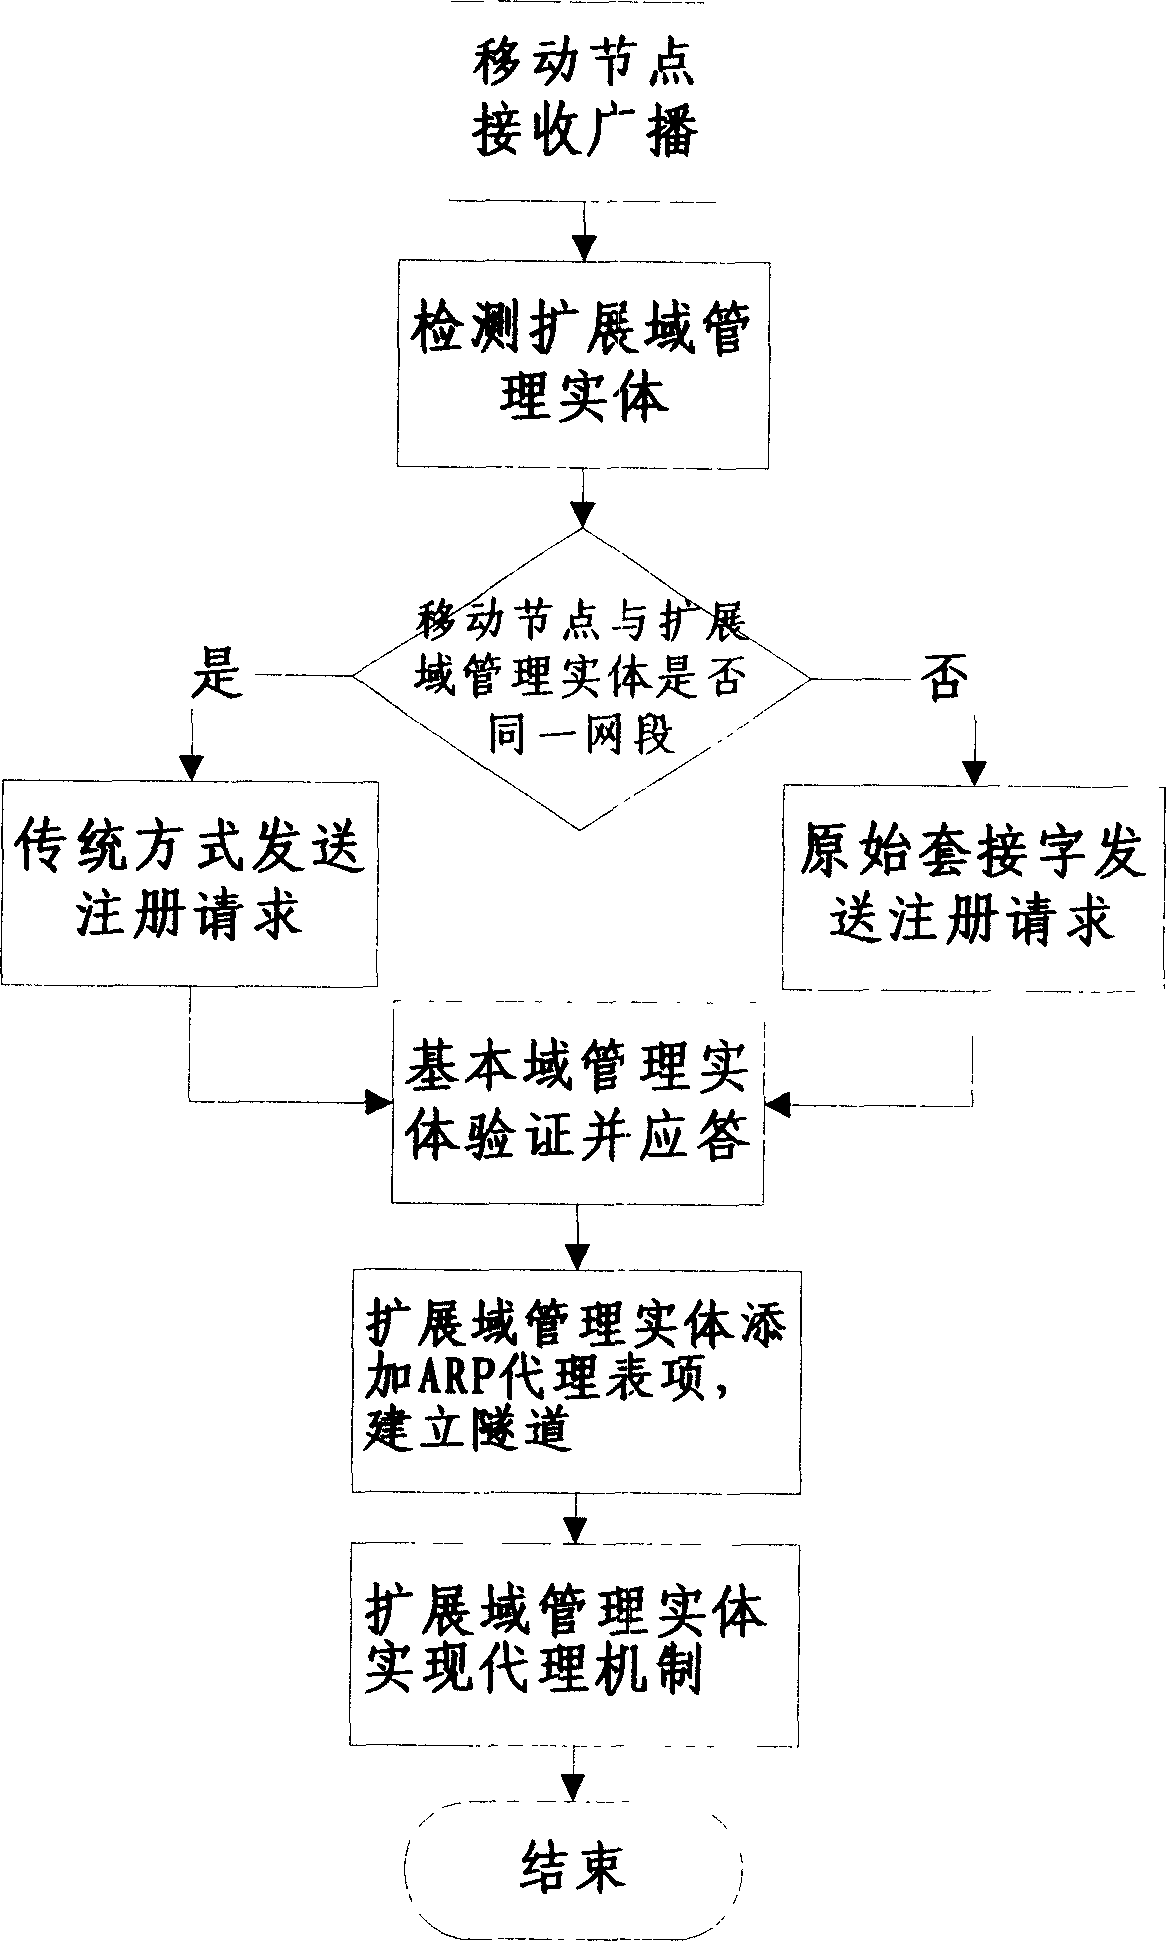 Method for, realizing self adaption extension domain management entity mechanism Flexible IP network technology system